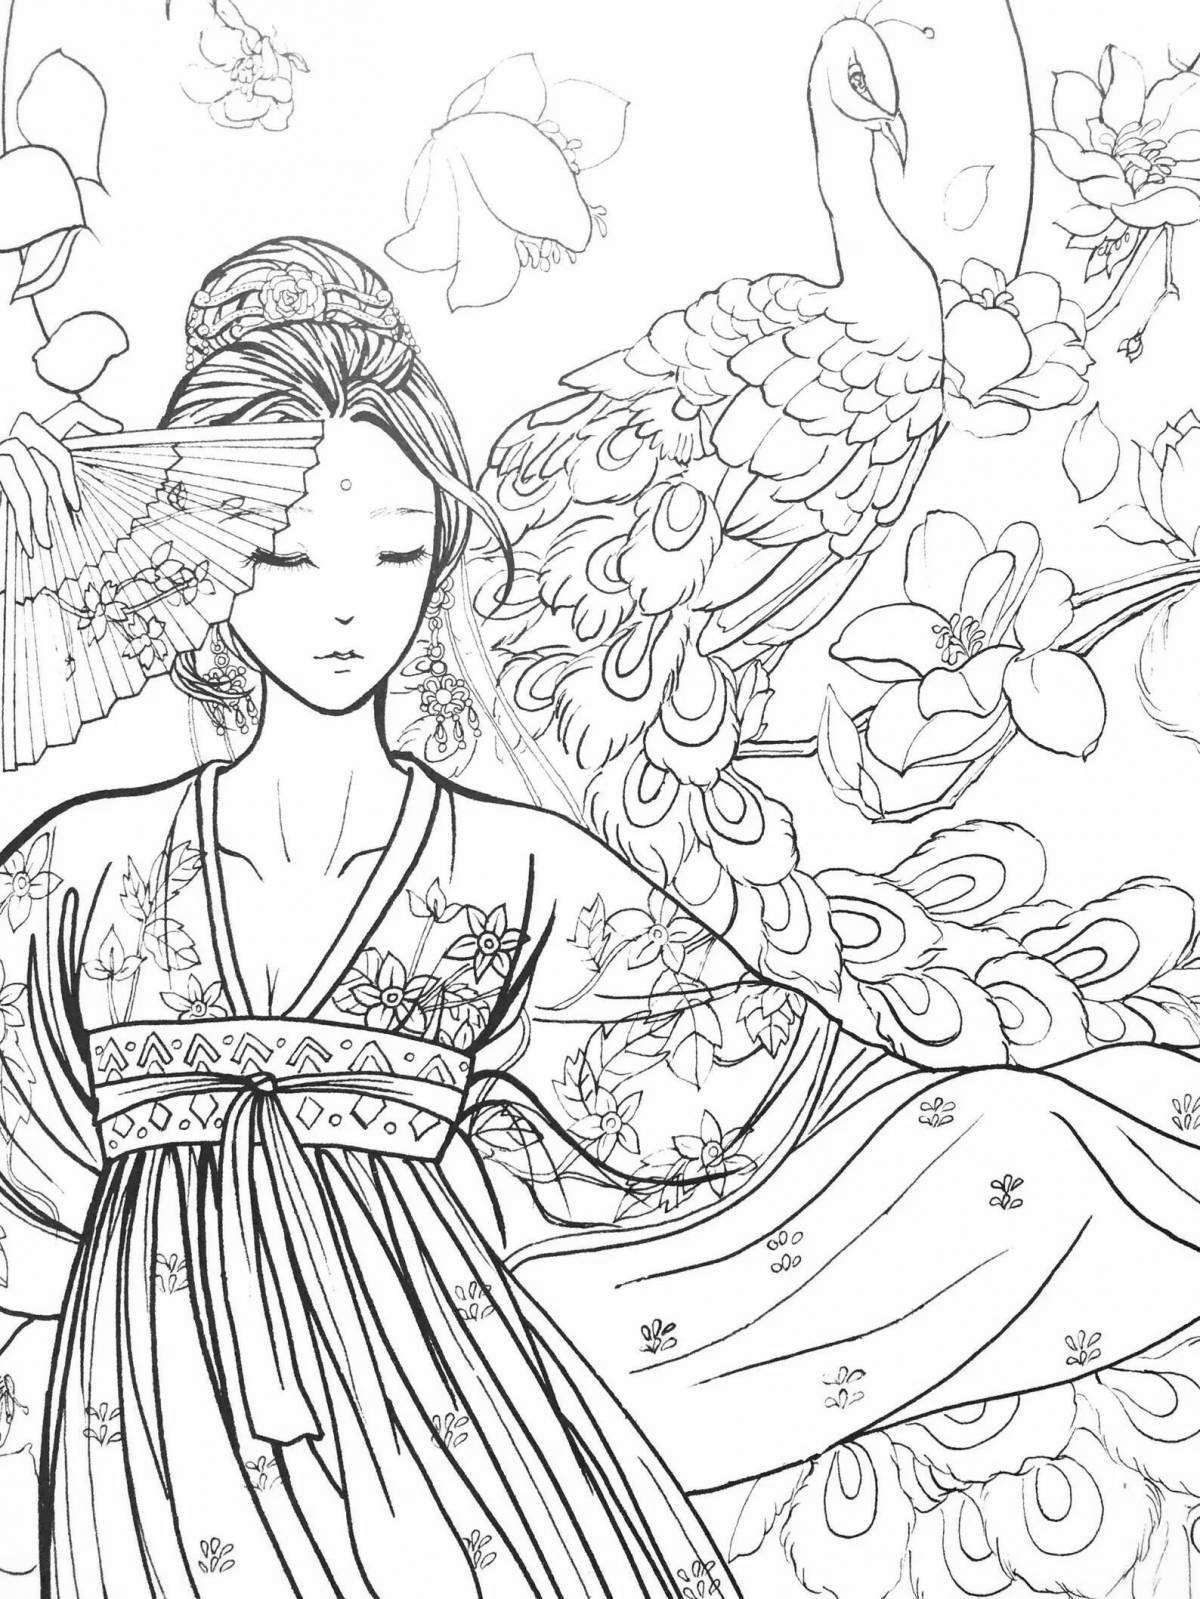 Blessed Chinese women coloring page